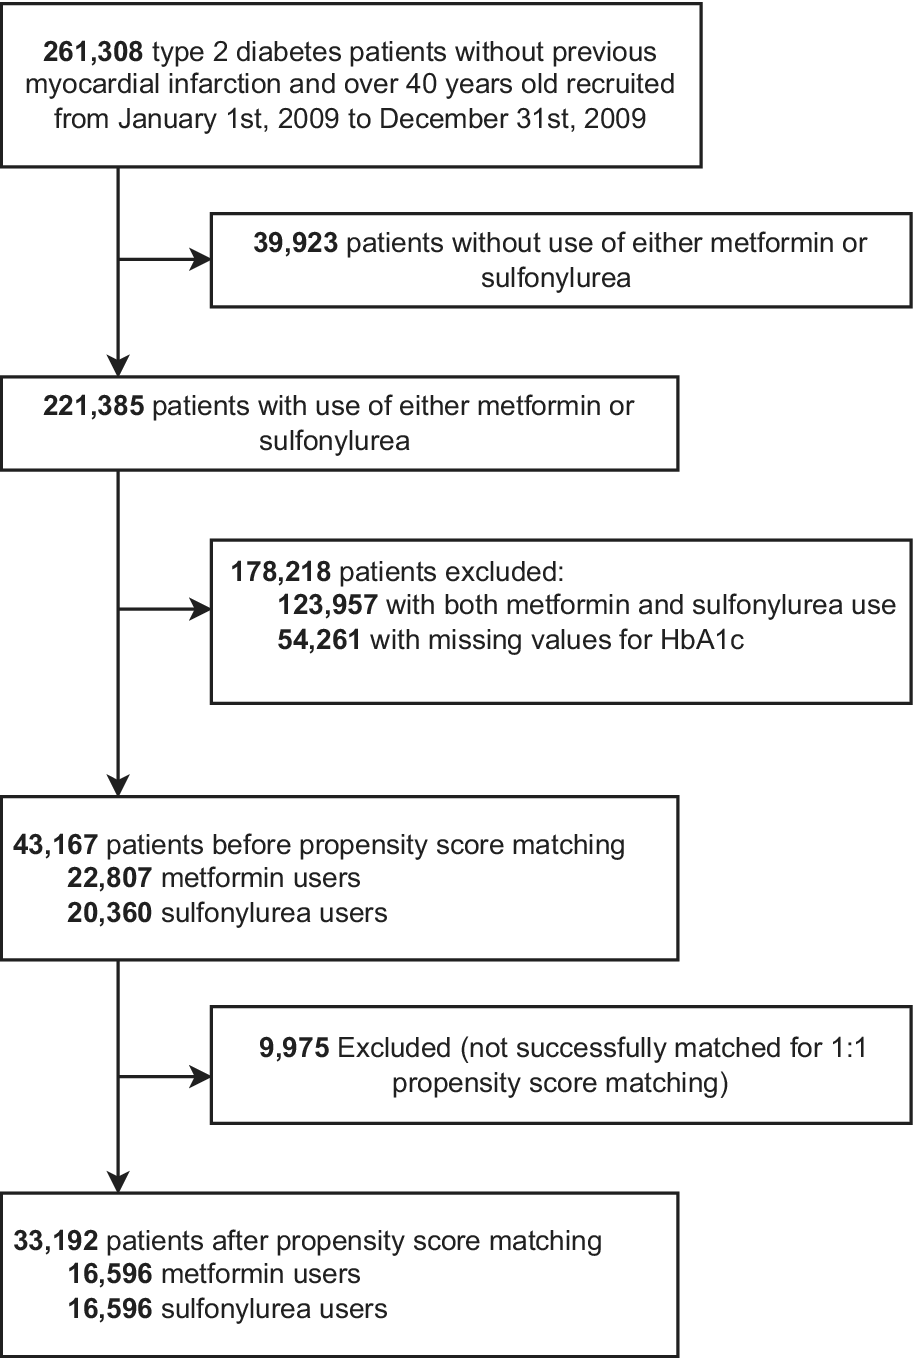 Sulfonylurea Is Associated With Higher Risks of Ventricular Arrhythmia or Sudden Cardiac Death Compared With Metformin: A Population‐Based Cohort Study